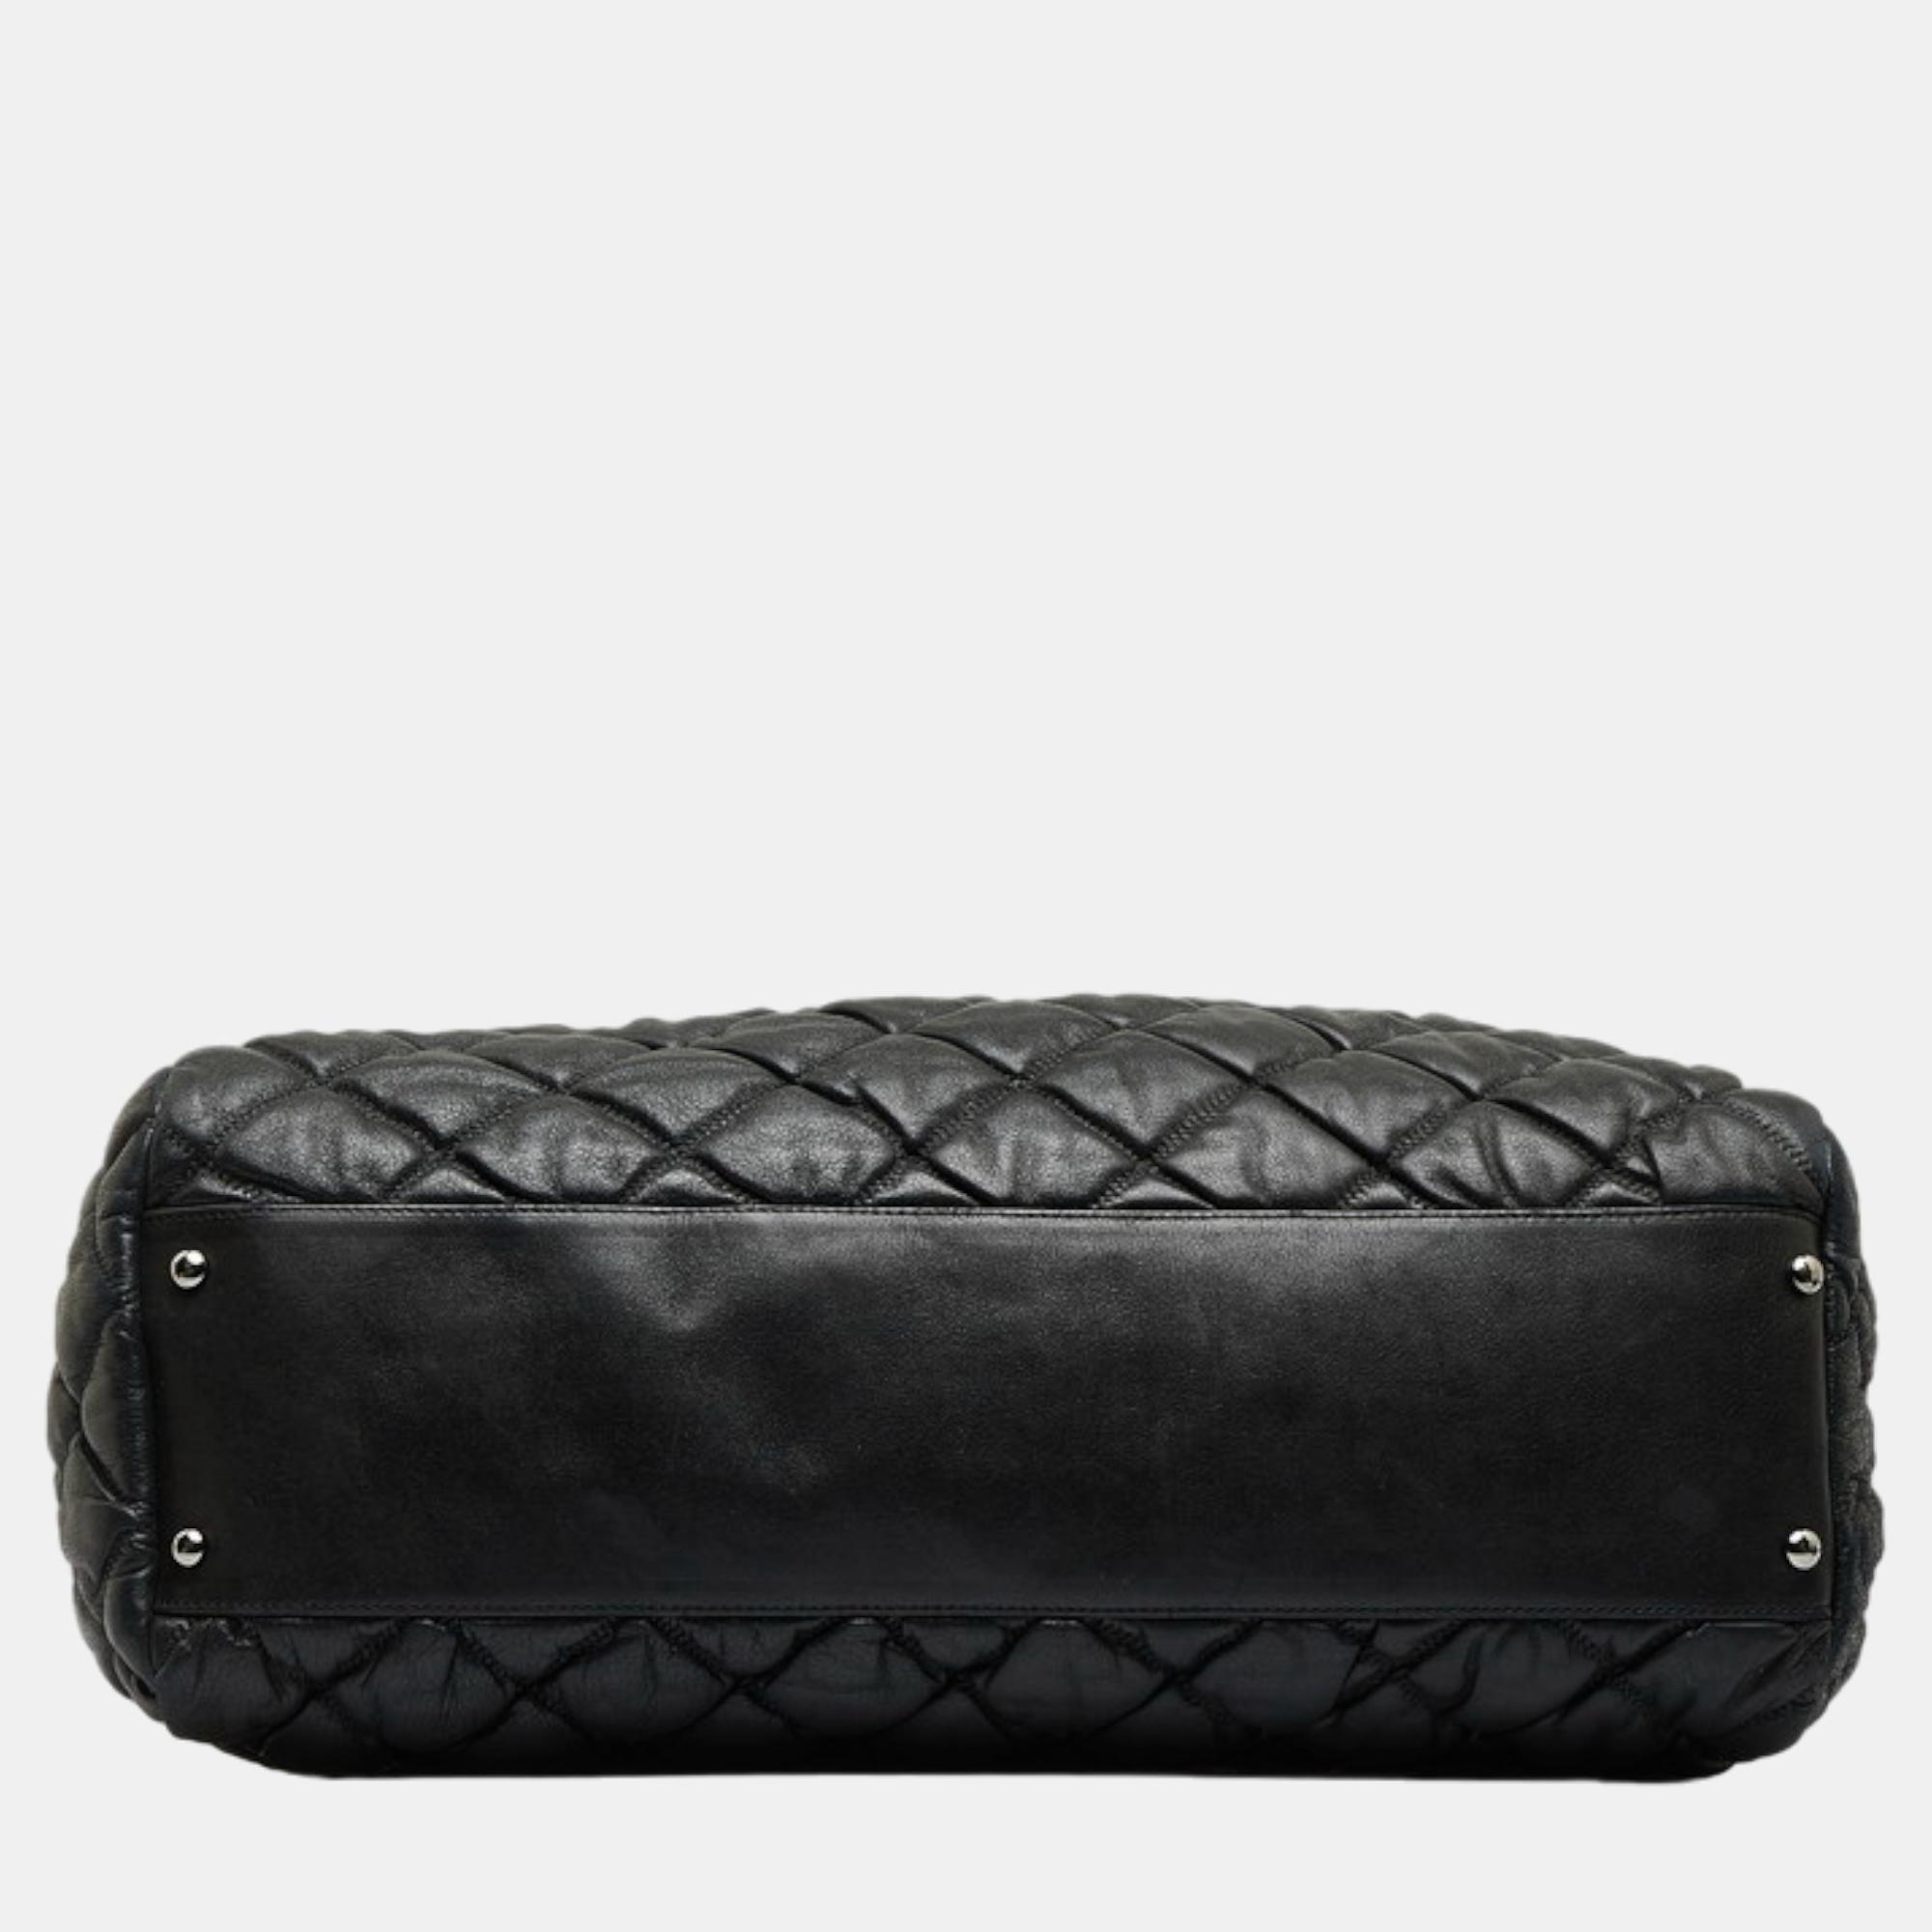 Chanel Black Leather CC Quilted Leather Chain Zip Tote Tote Bag